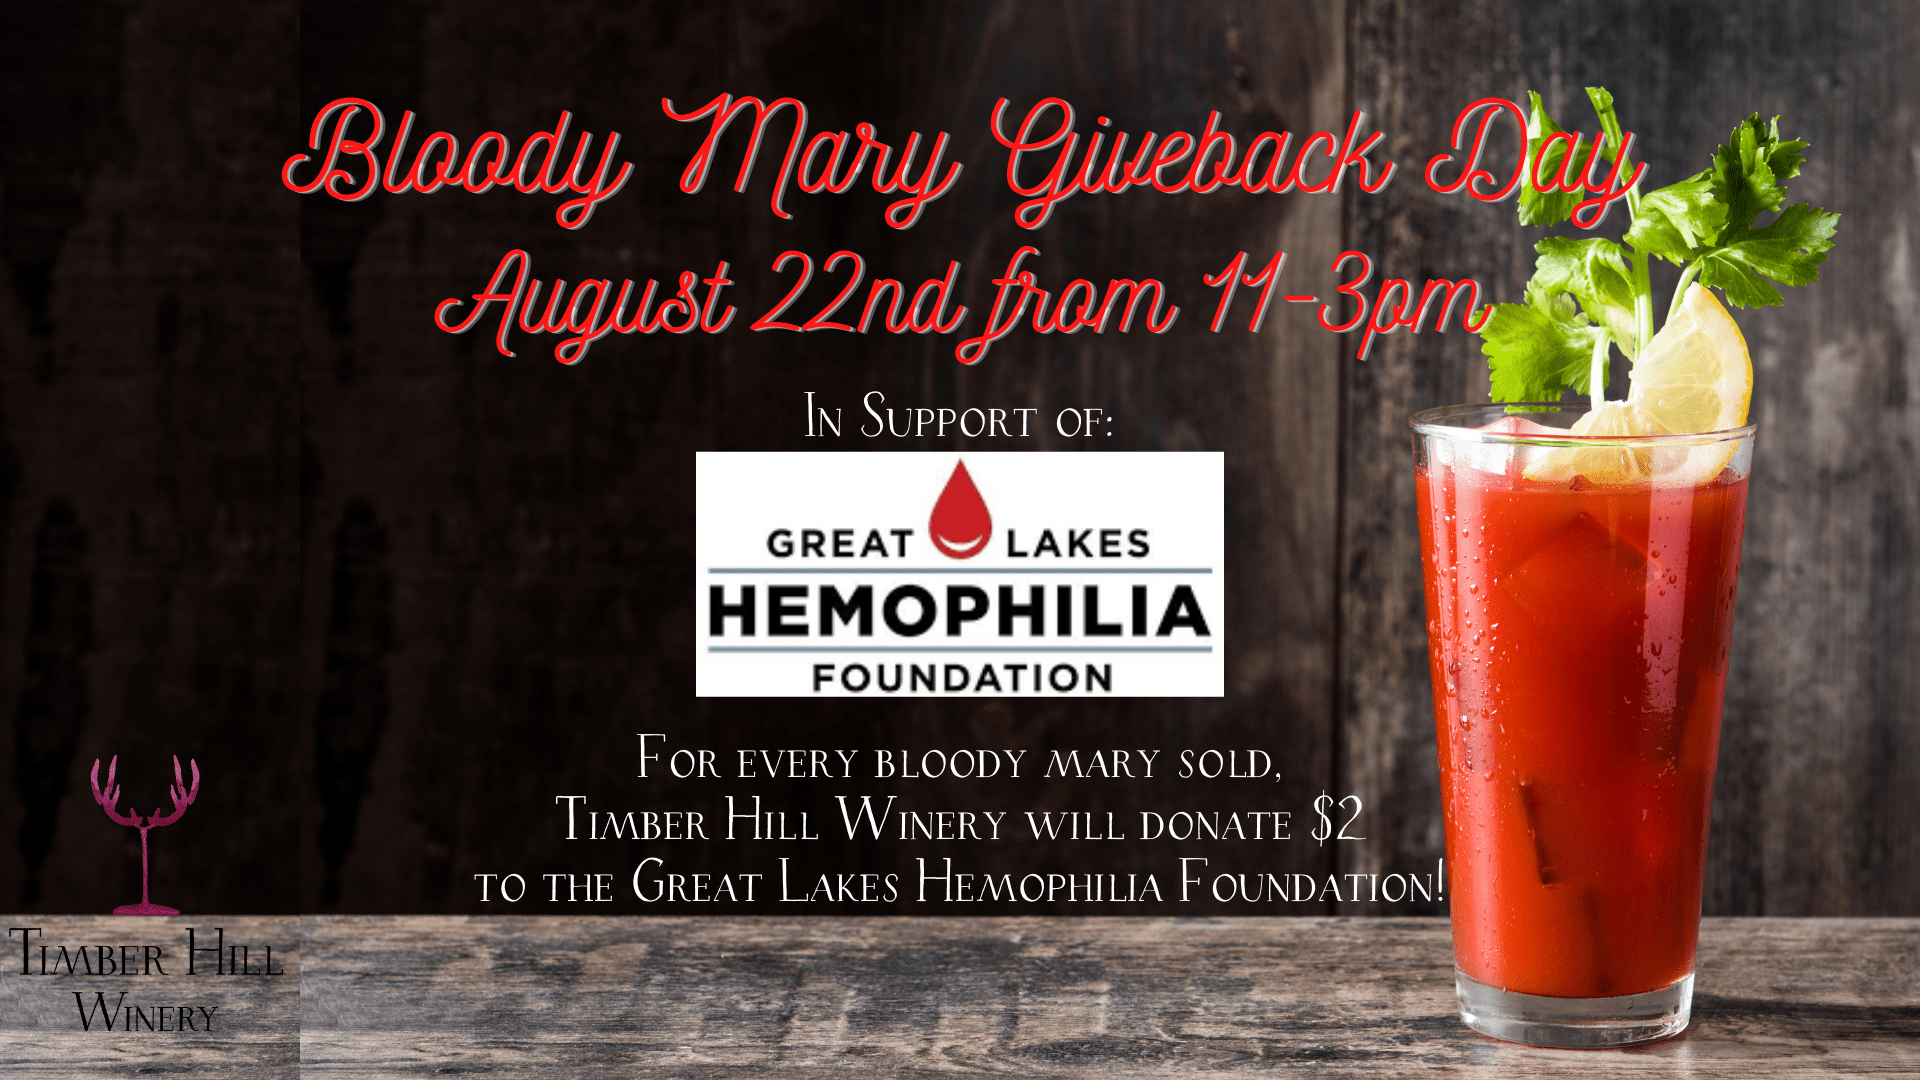 Bloody Mary Giveback Day for The Great Lakes Hemophilia Foundation at Timber Hill Winery August 22nd from 11-3pm